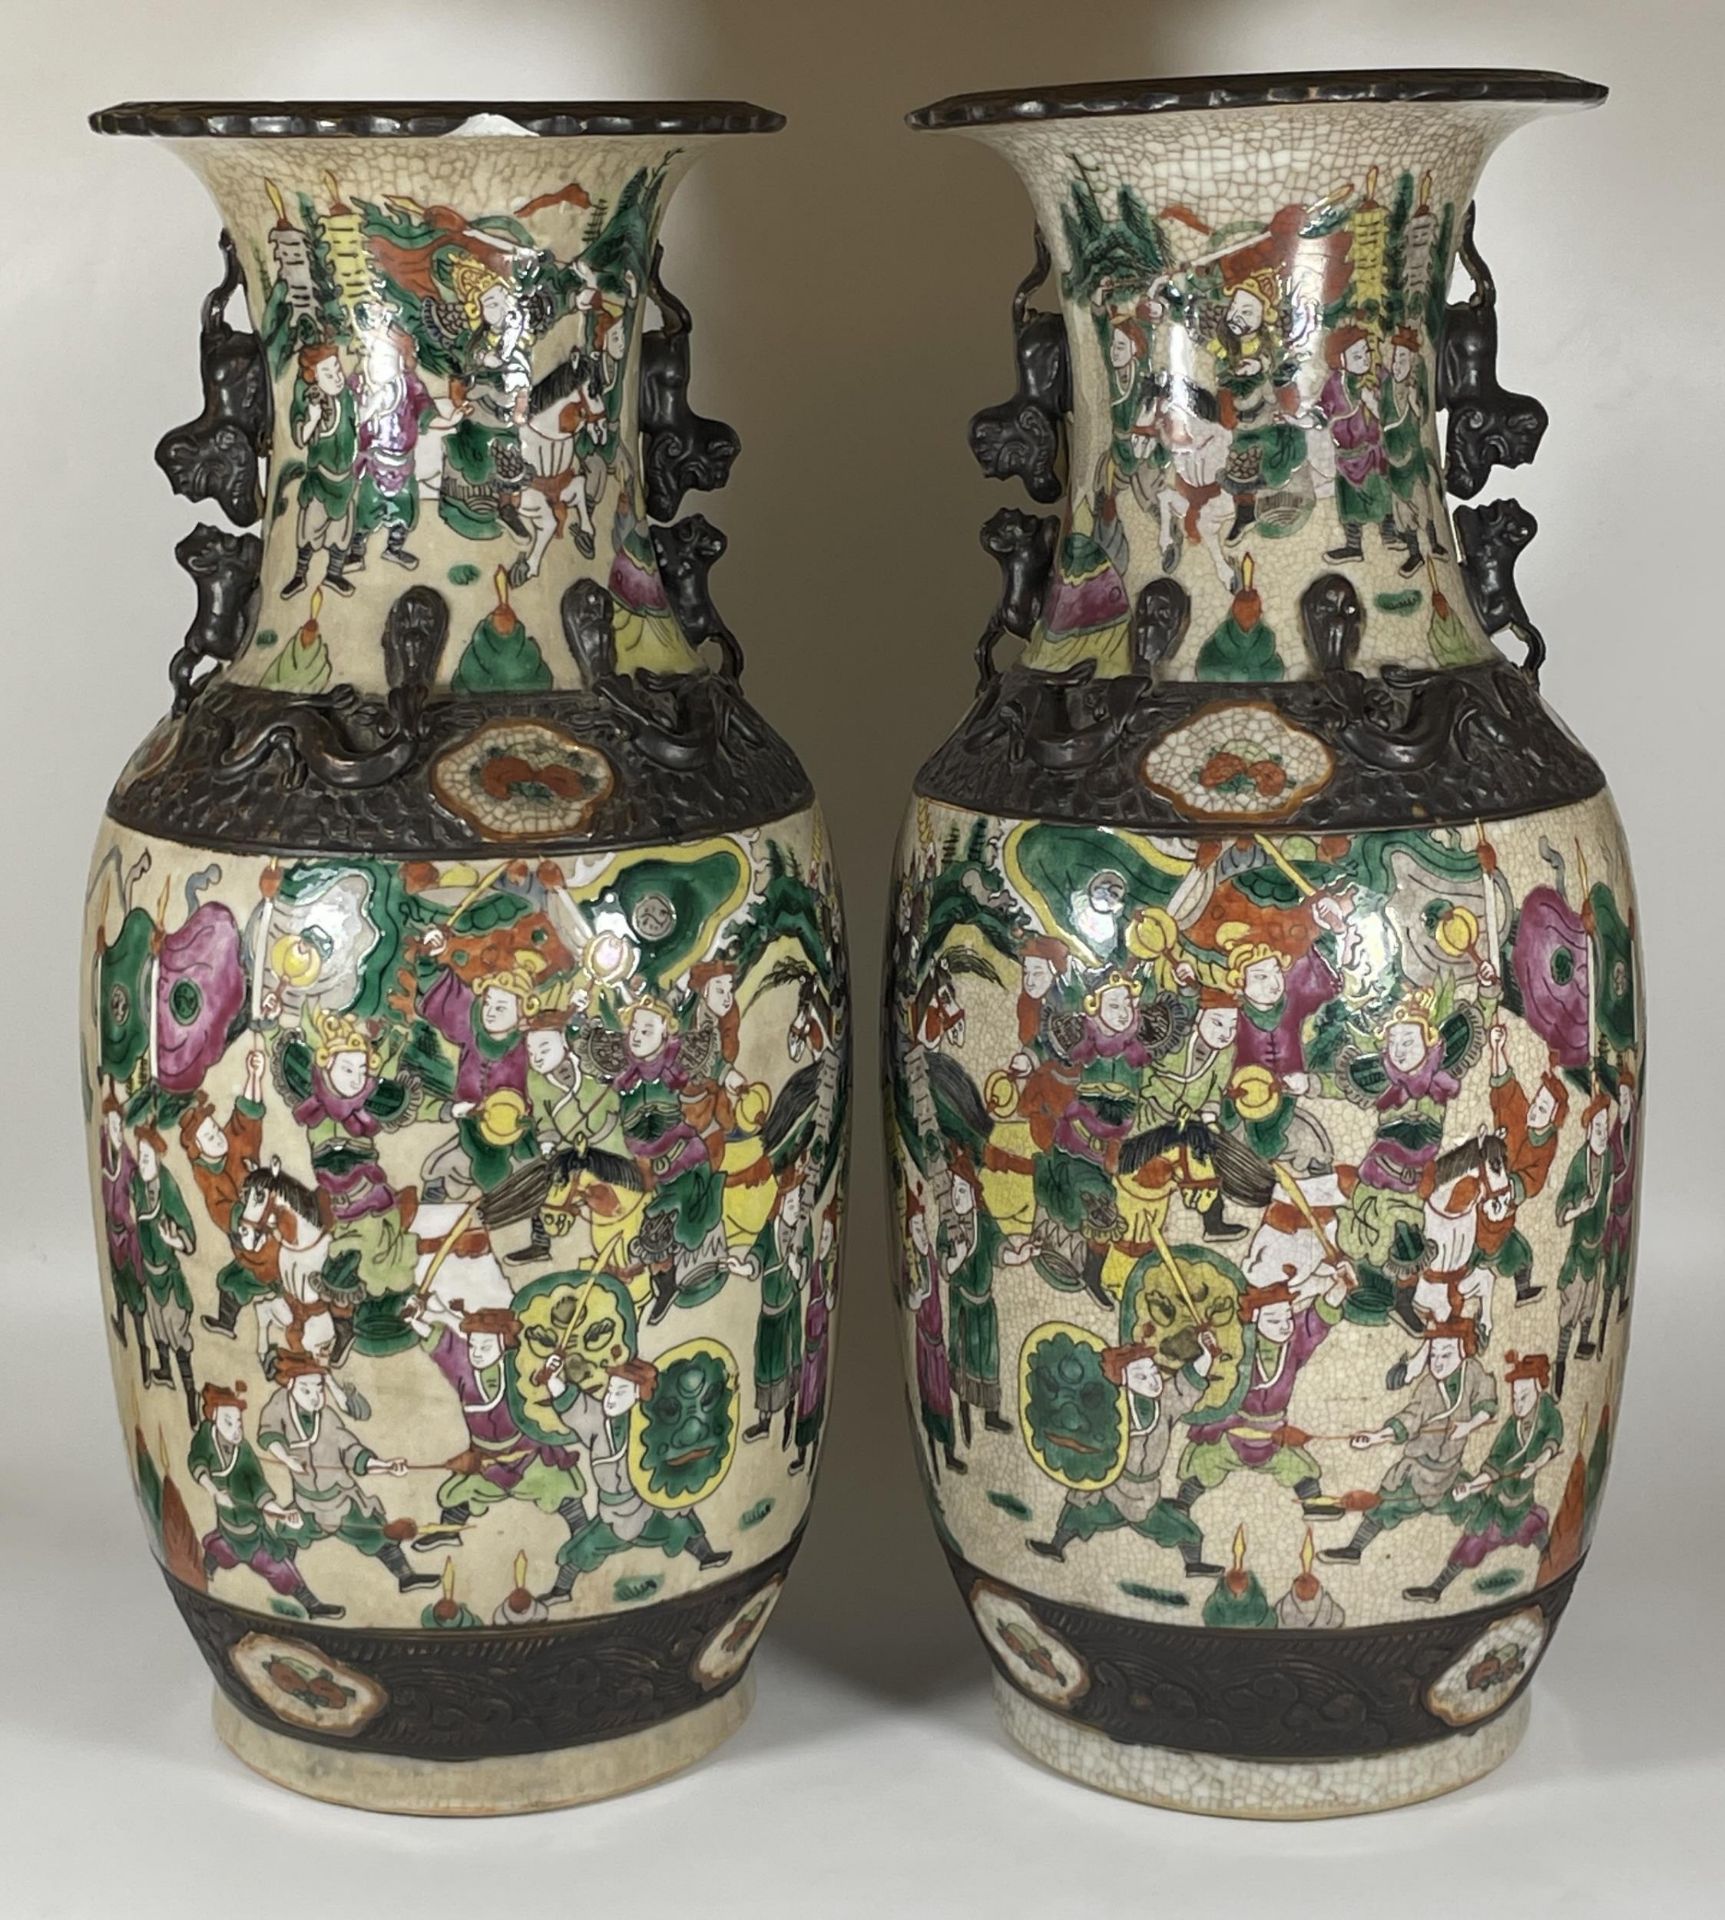 A HUGE PAIR OF CHINESE LATE 19TH / EARLY 20TH CENTURY CRACKLE GLAZE PORCELAIN VASES DEPICTING